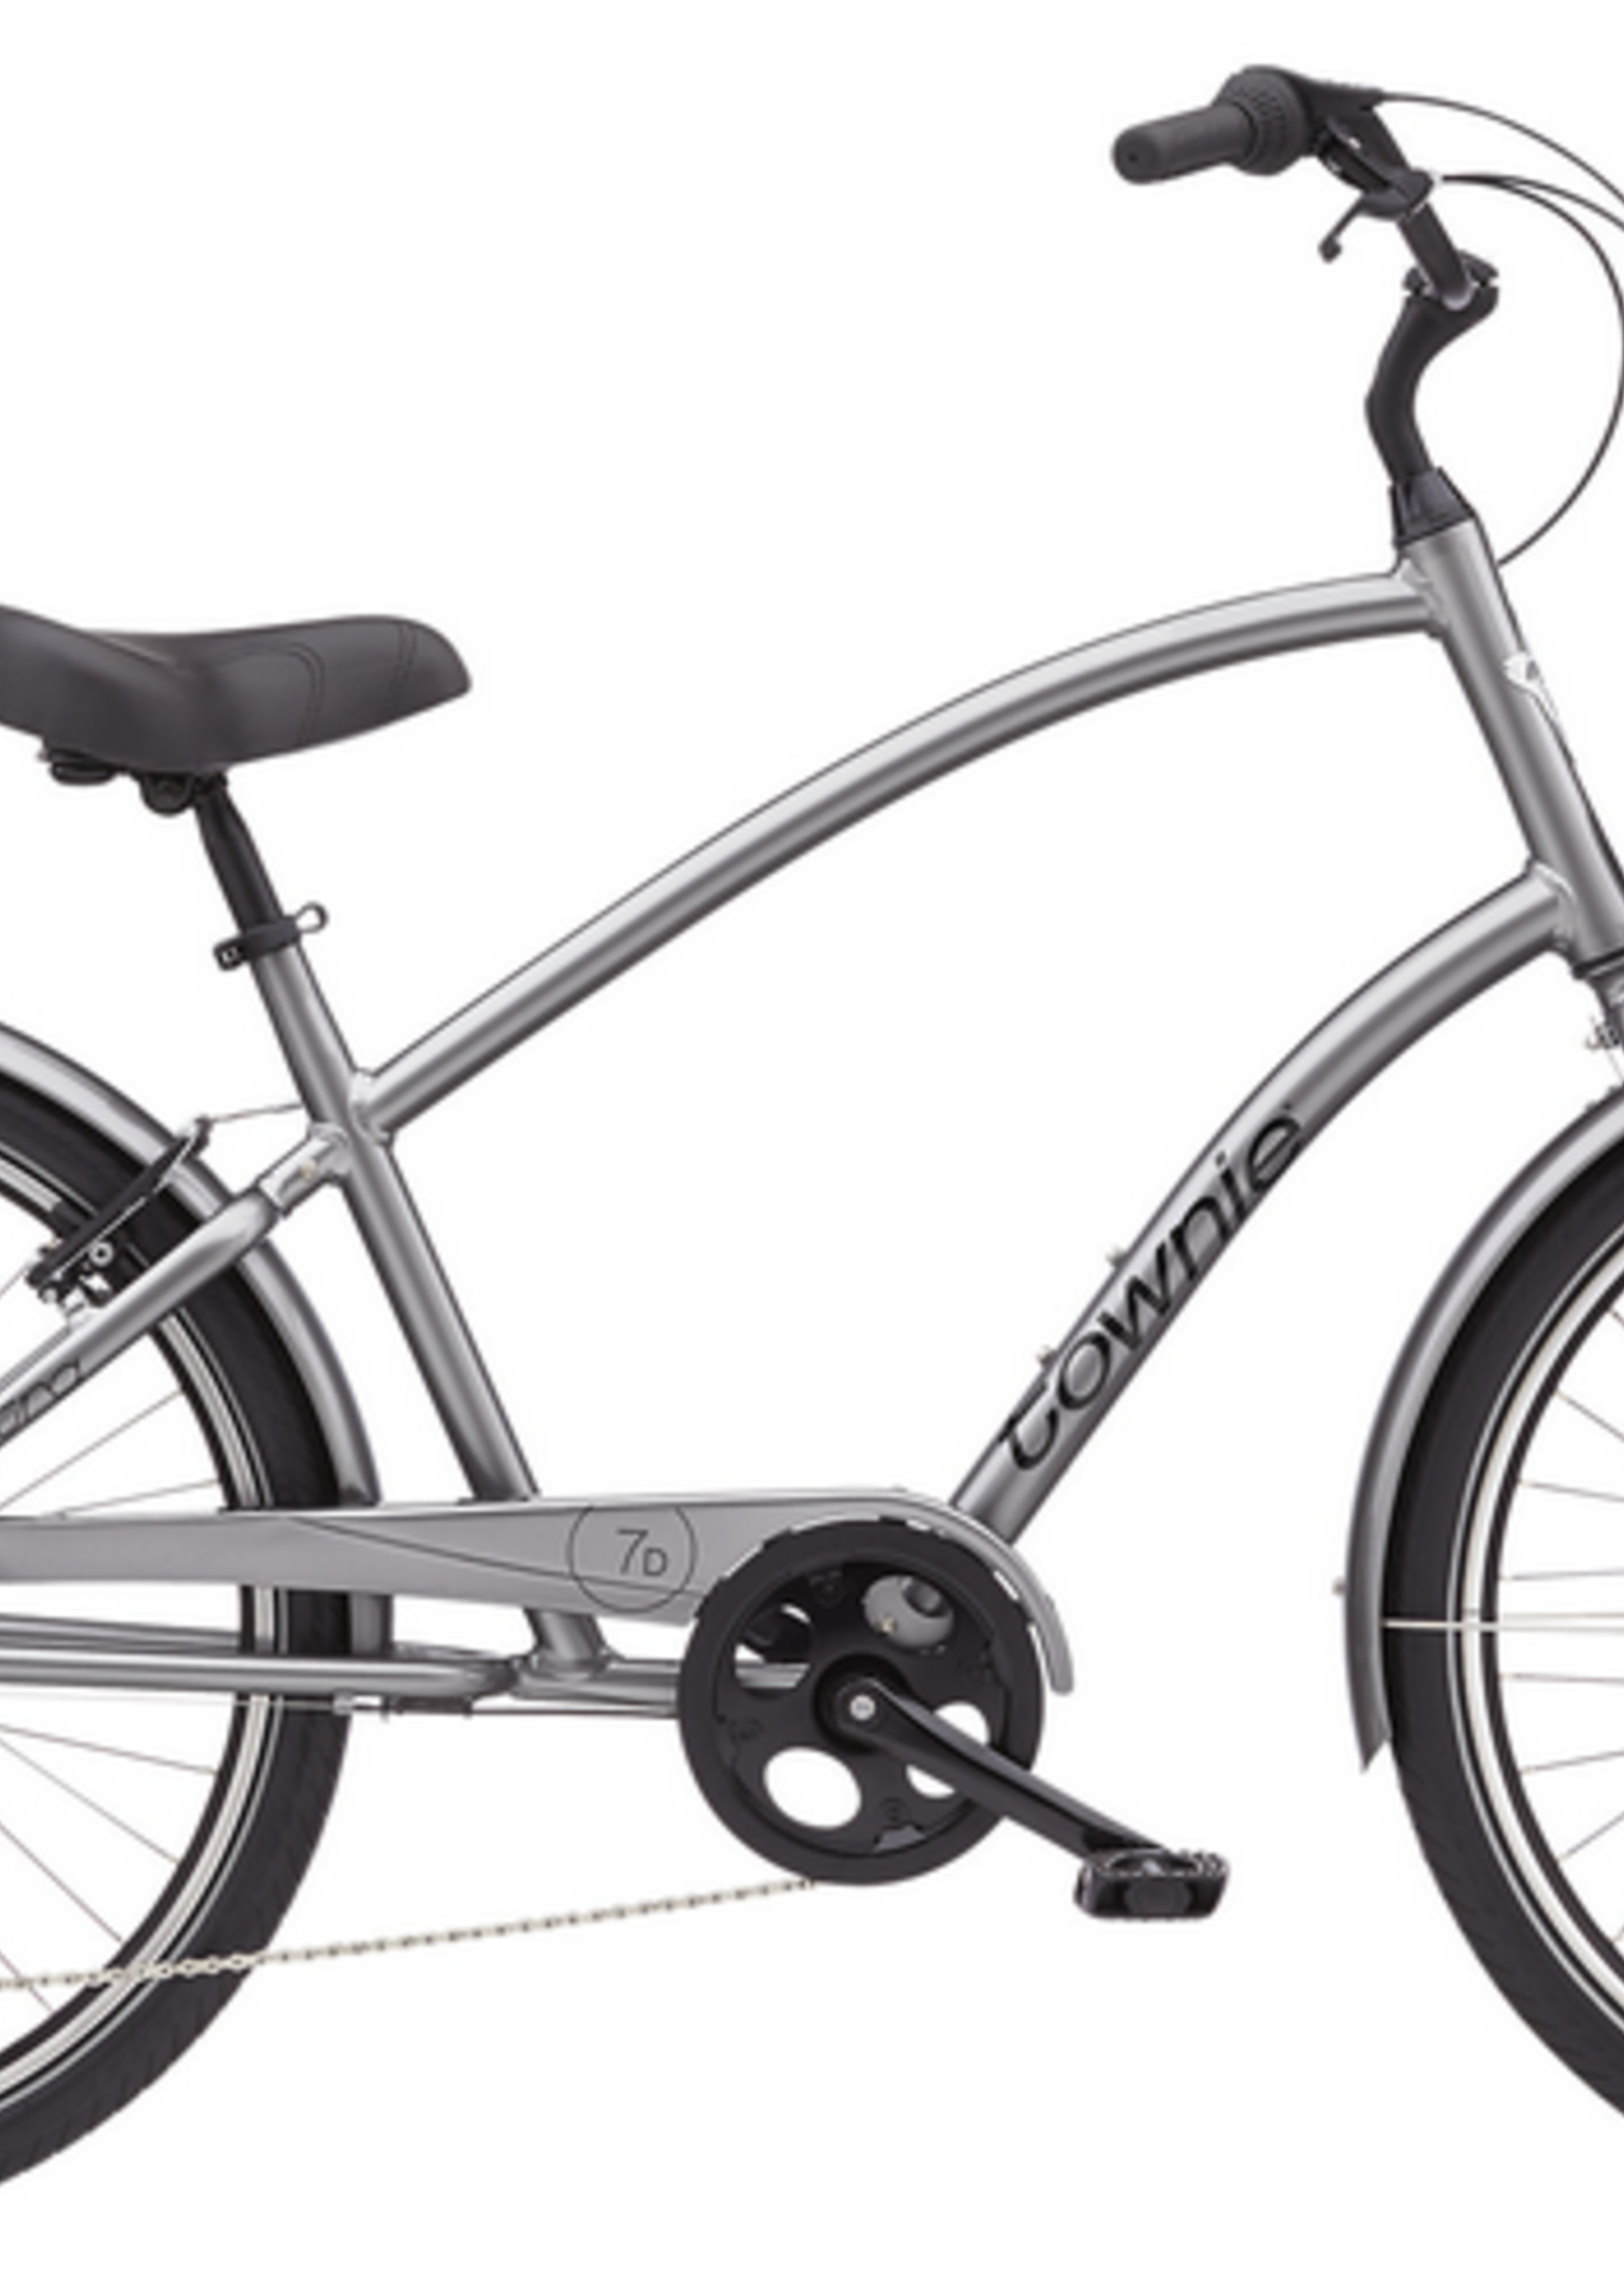 Electra Bicycle Company Townie 7d eq Stepover